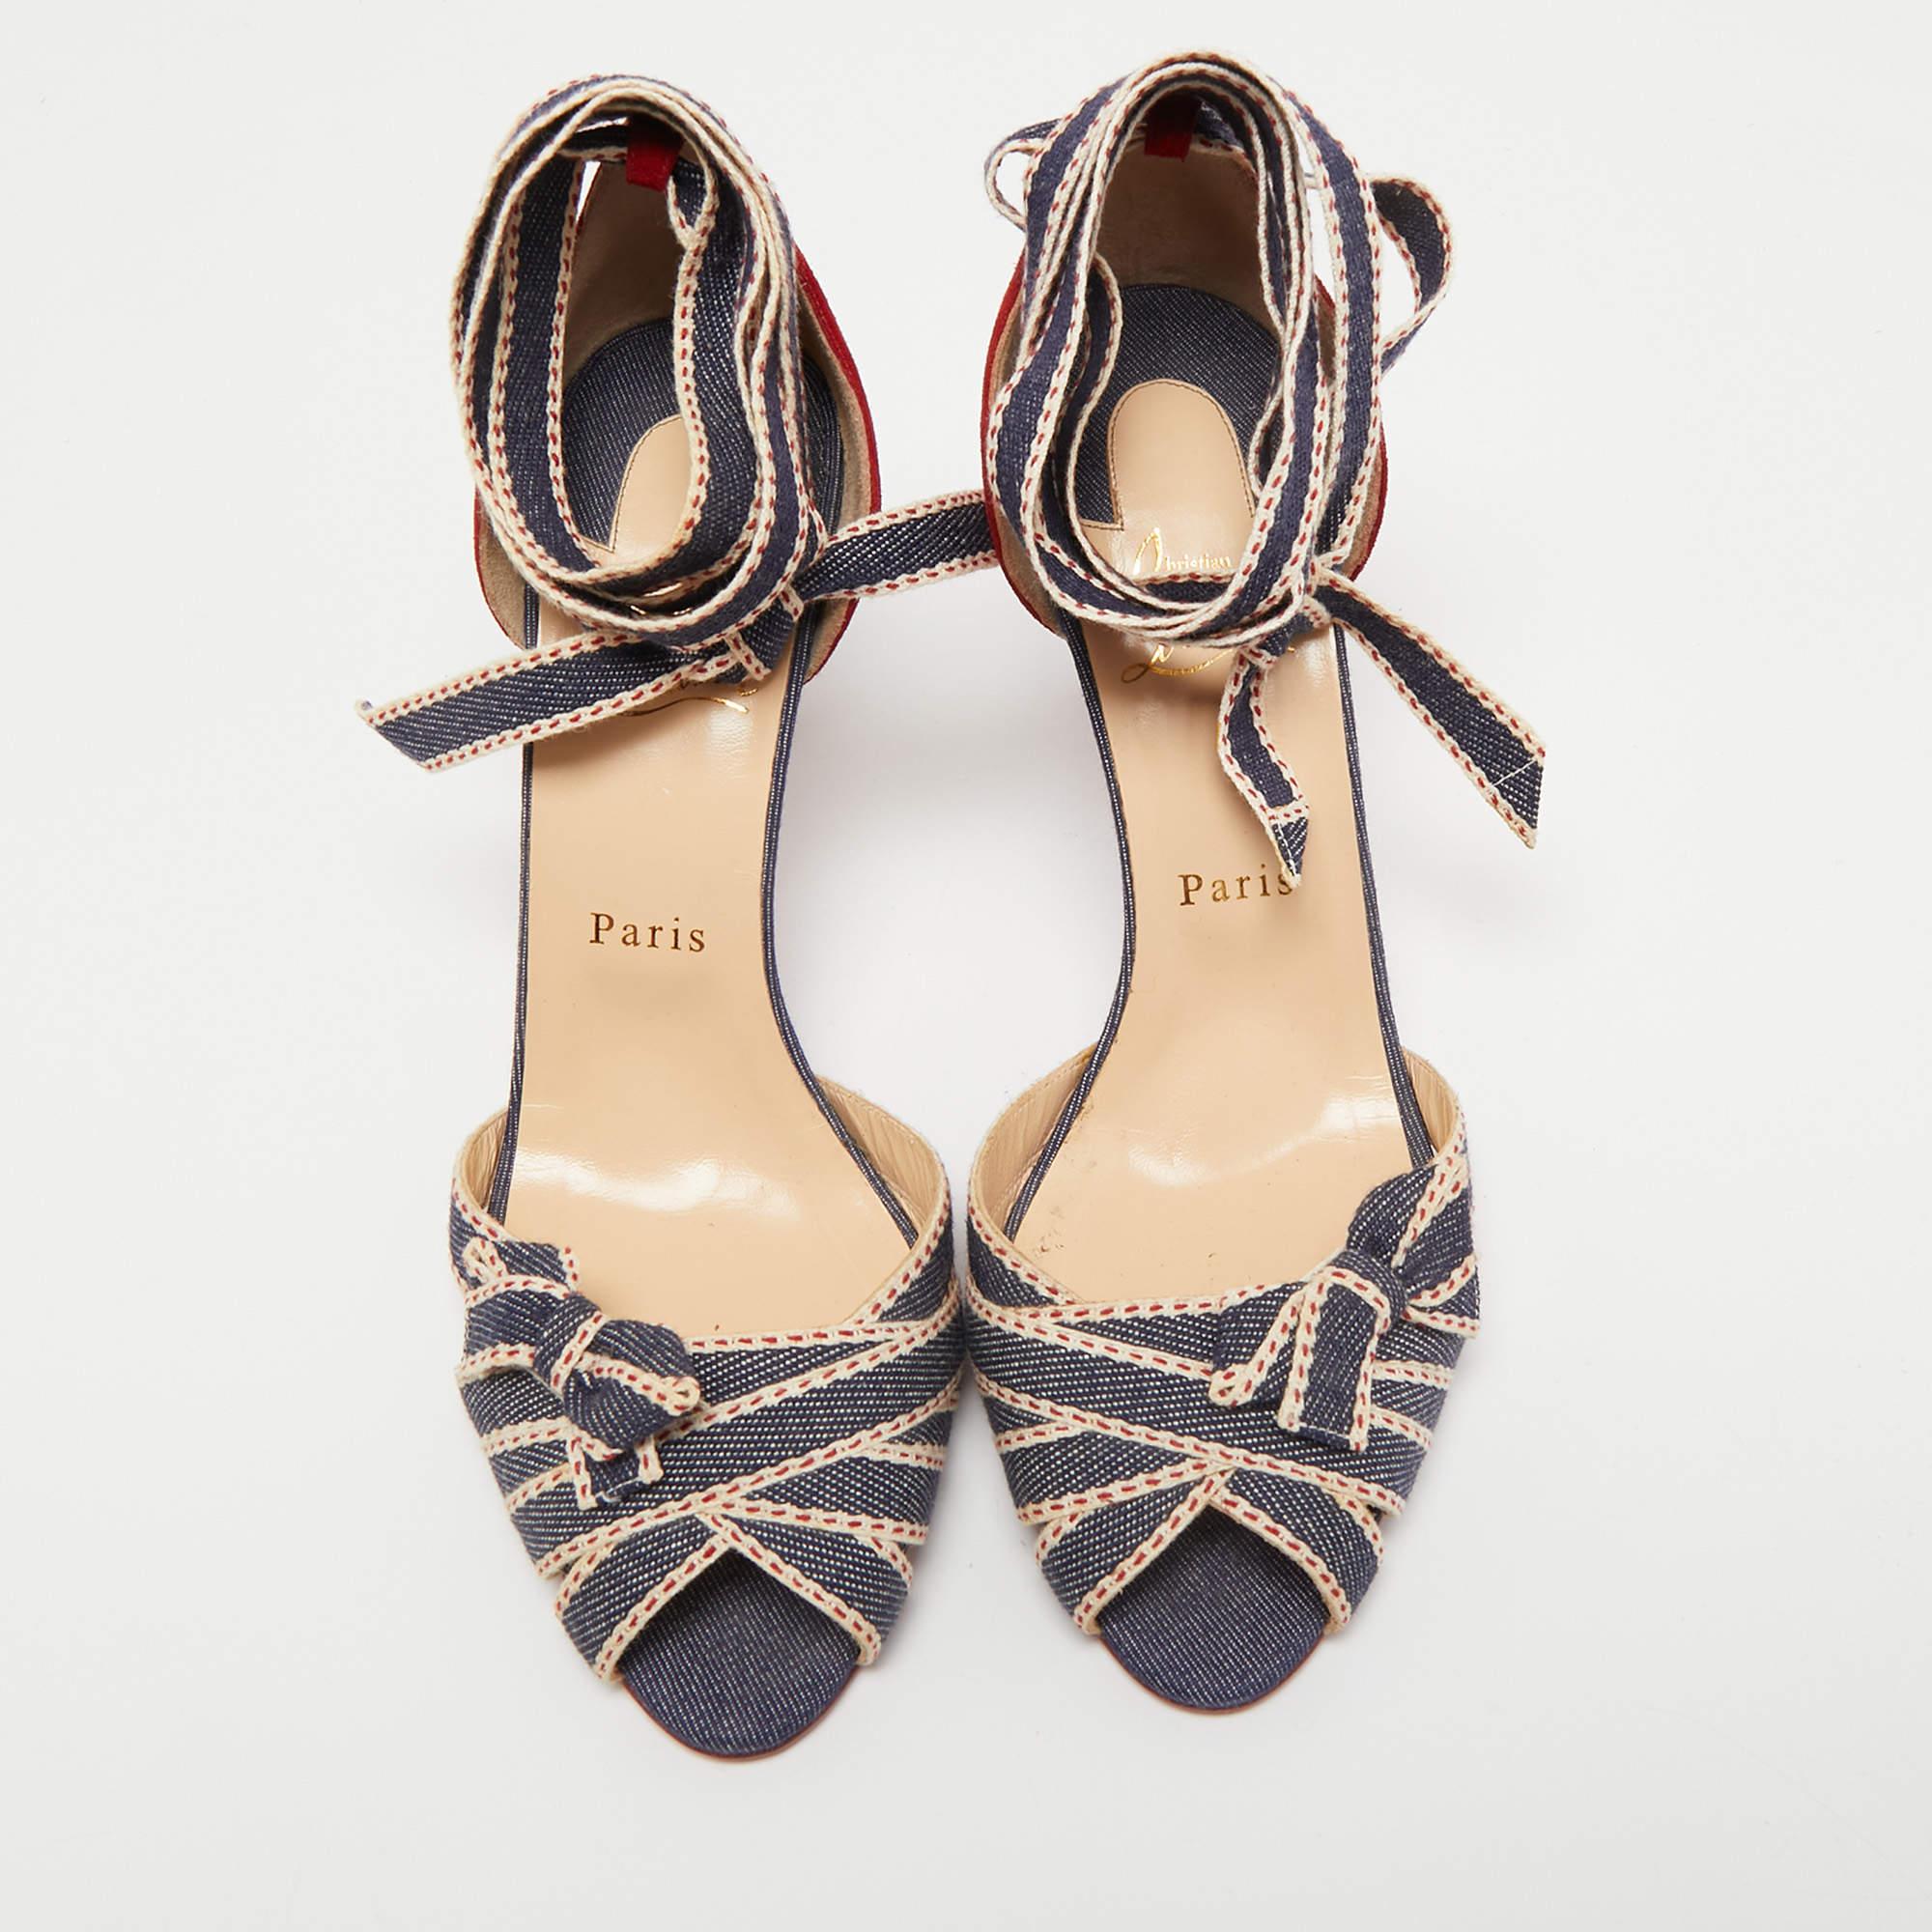 Deliver statement looks with these sandals from Christian Louboutin! From their shape and detailing to their overall appeal, they exude sophisticated style. The sandals come crafted from suede and denim.

